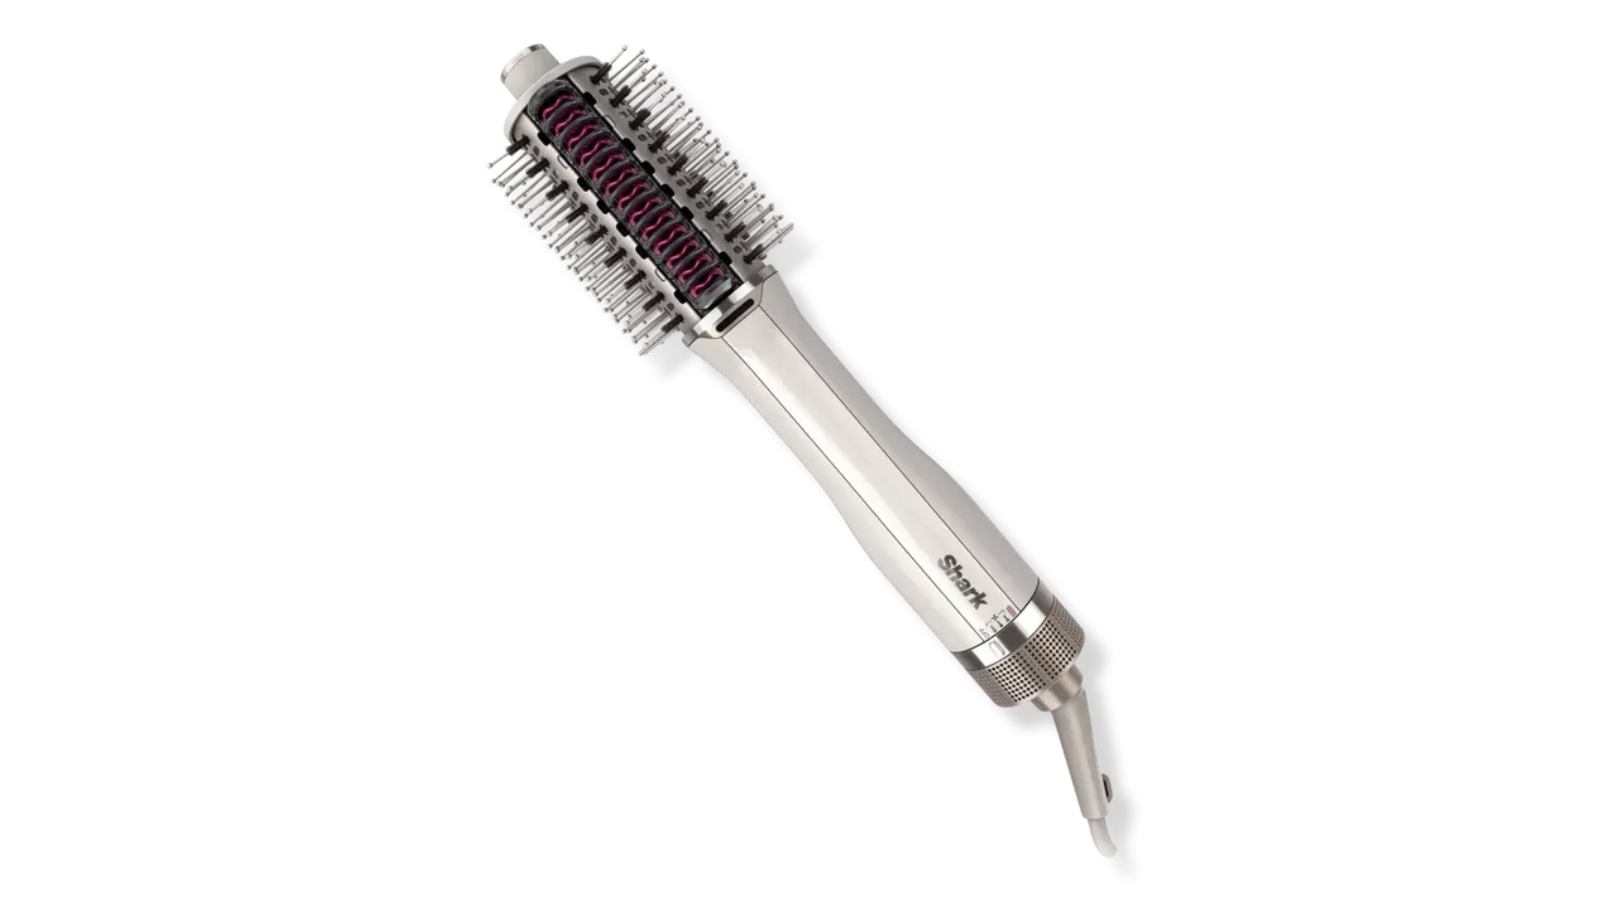 Shark SmoothStyle Hair Dryer Brush Review - Where to Buy, Price, Results